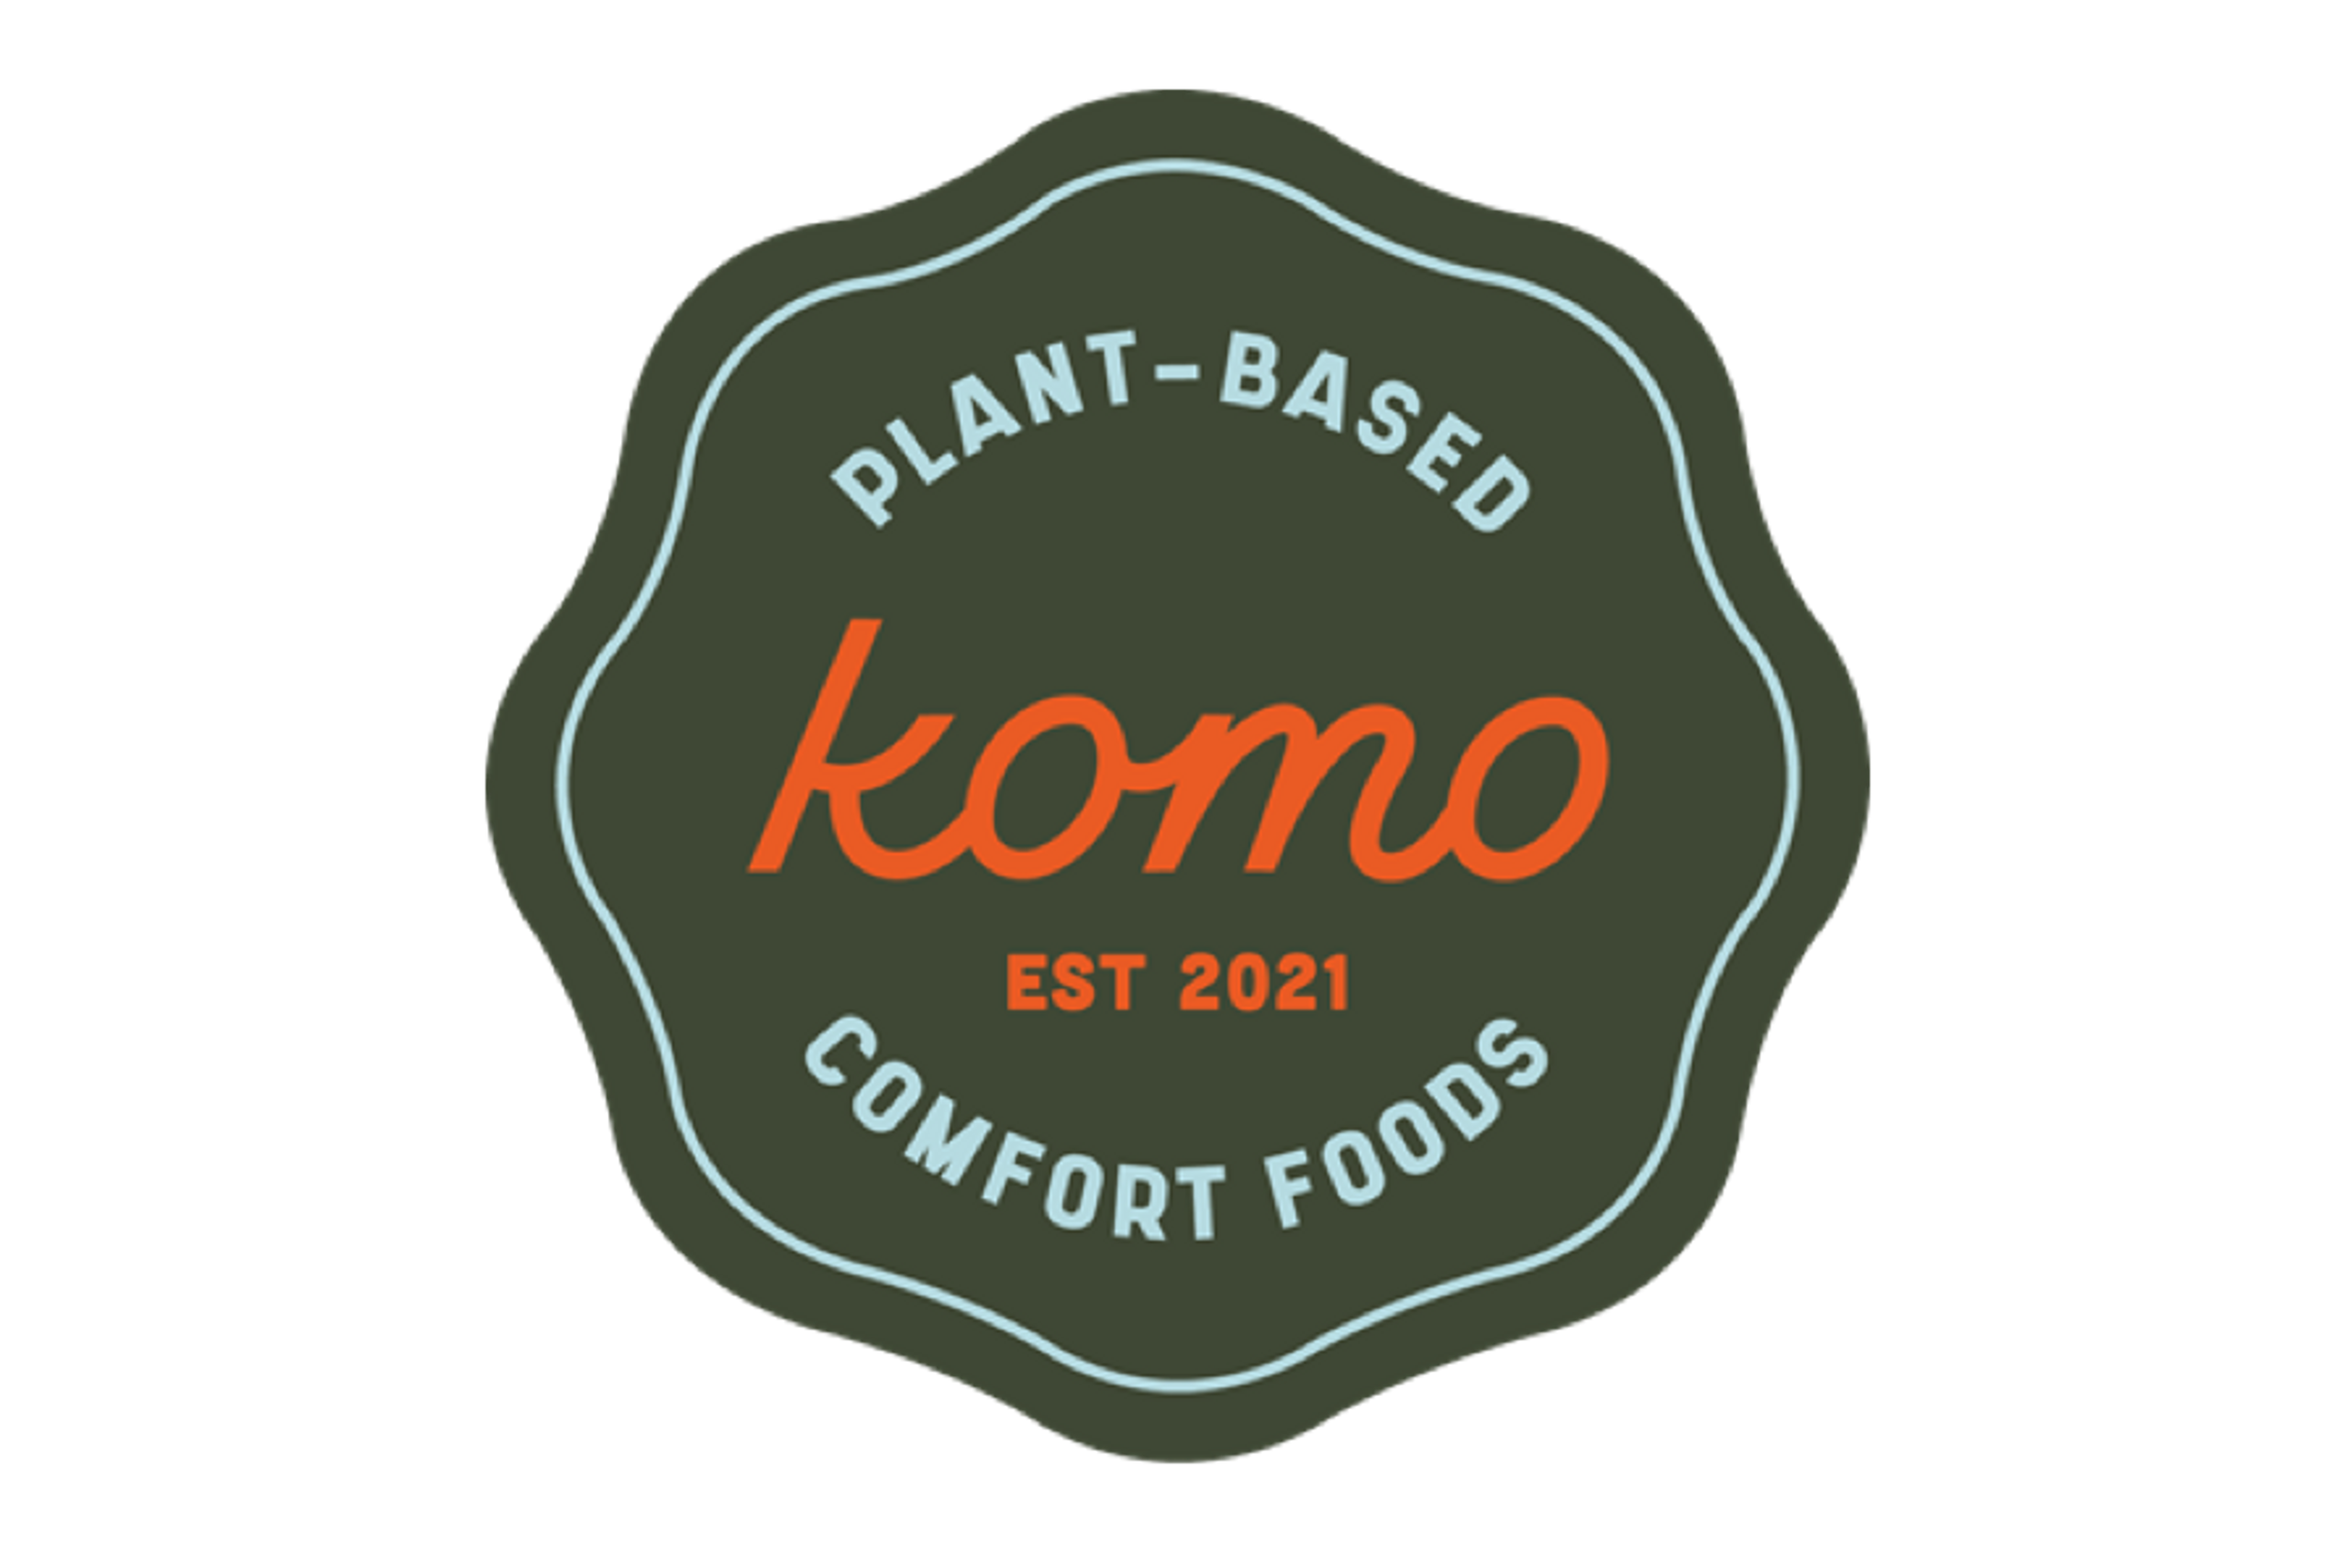 Komo Plant Based Foods to be Available for Online Purchase Across the United States through GTFO It's Vegan